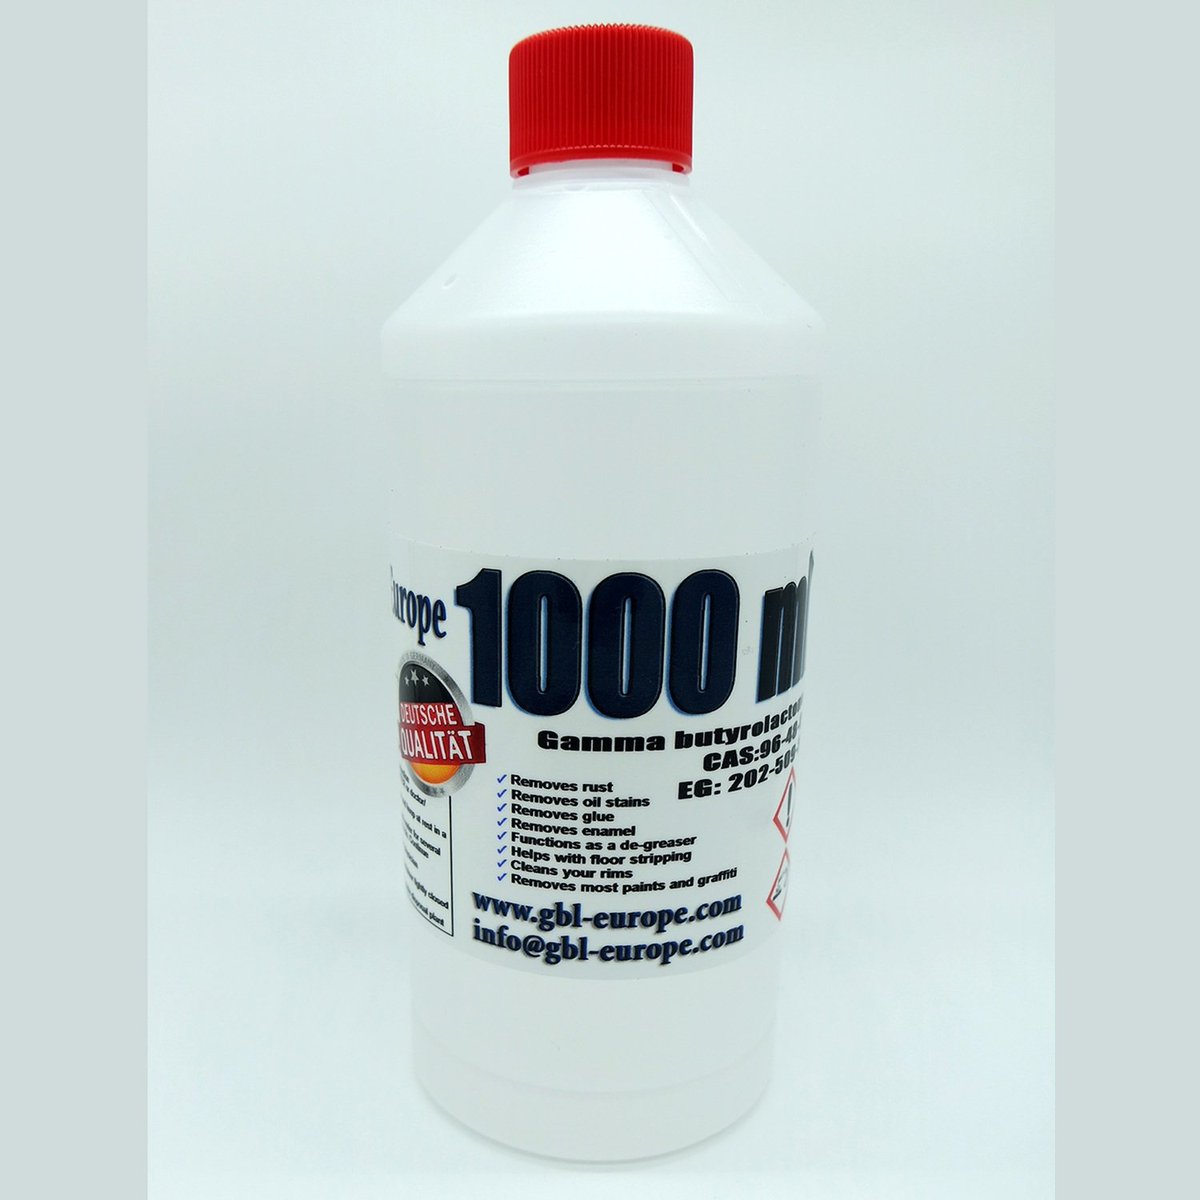 GBL Europe on X: Industrial Cleaner 250 ml Technical Grade   #GBL #y-butyrolactone #GBL Europe   / X